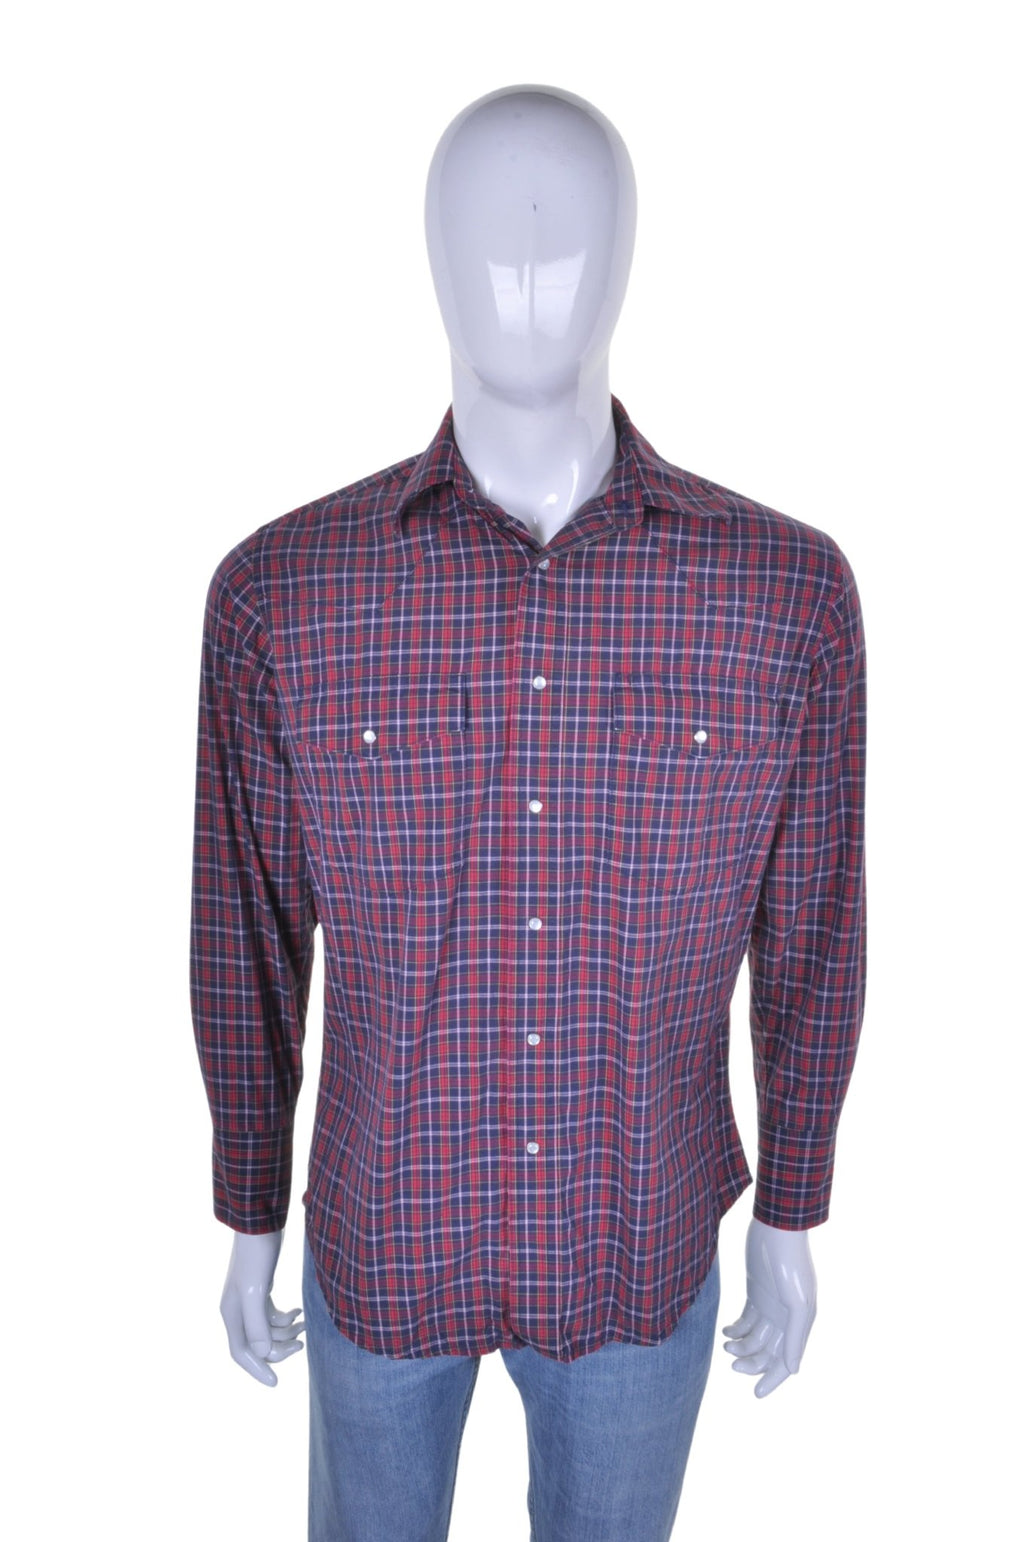 Wrangler Blue/Red Checked Western Shirt L - Minimum Mouse